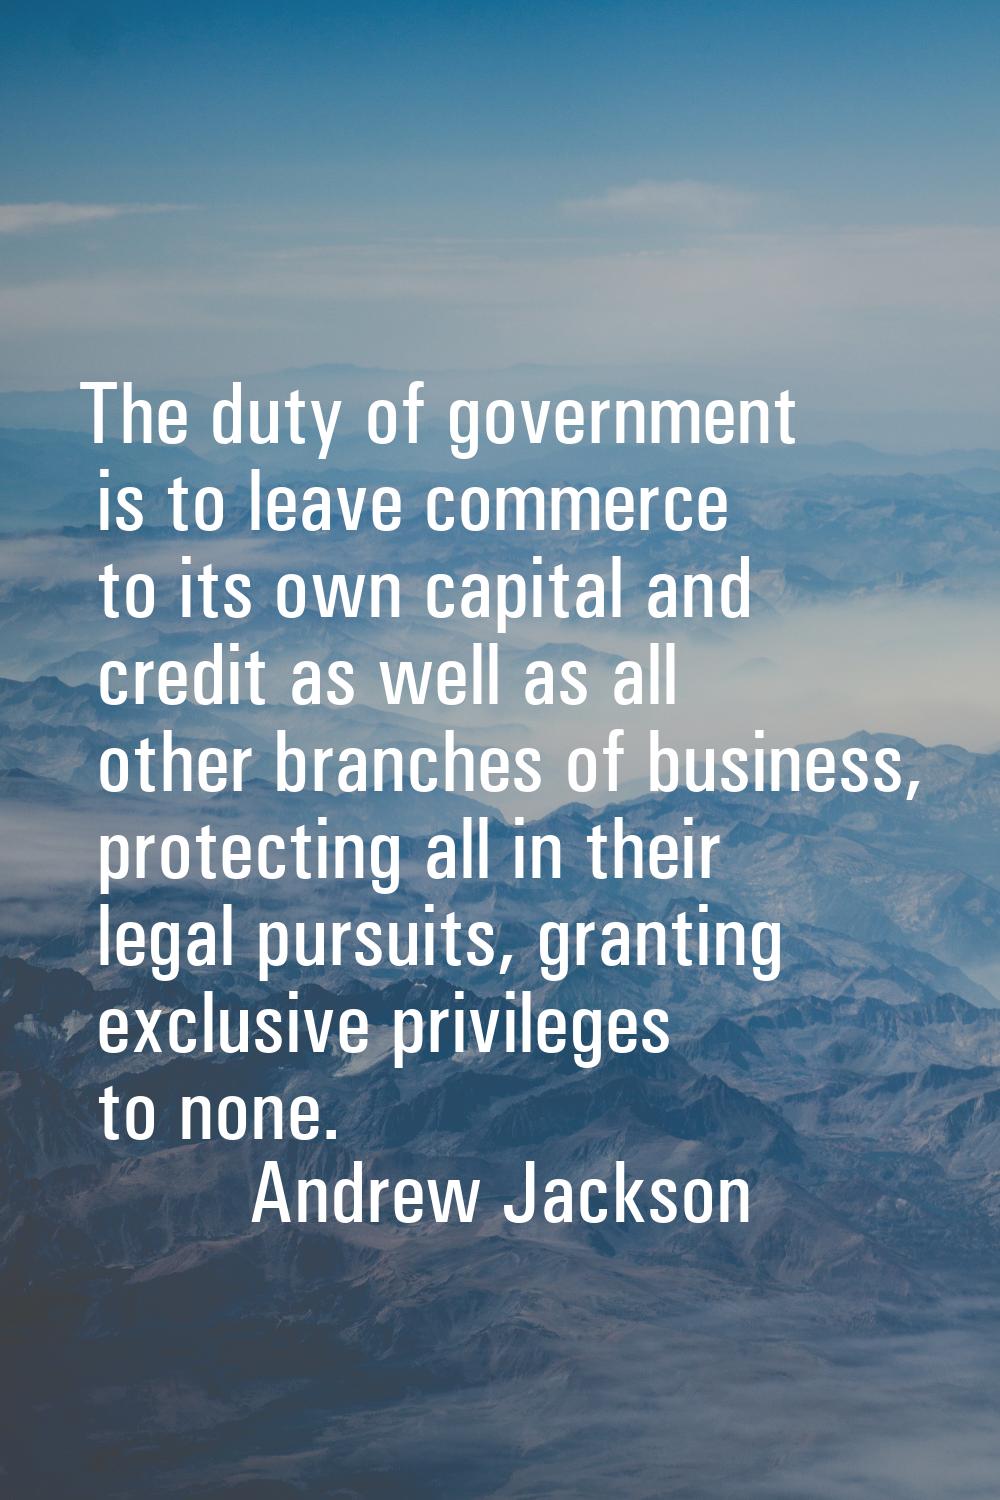 The duty of government is to leave commerce to its own capital and credit as well as all other bran